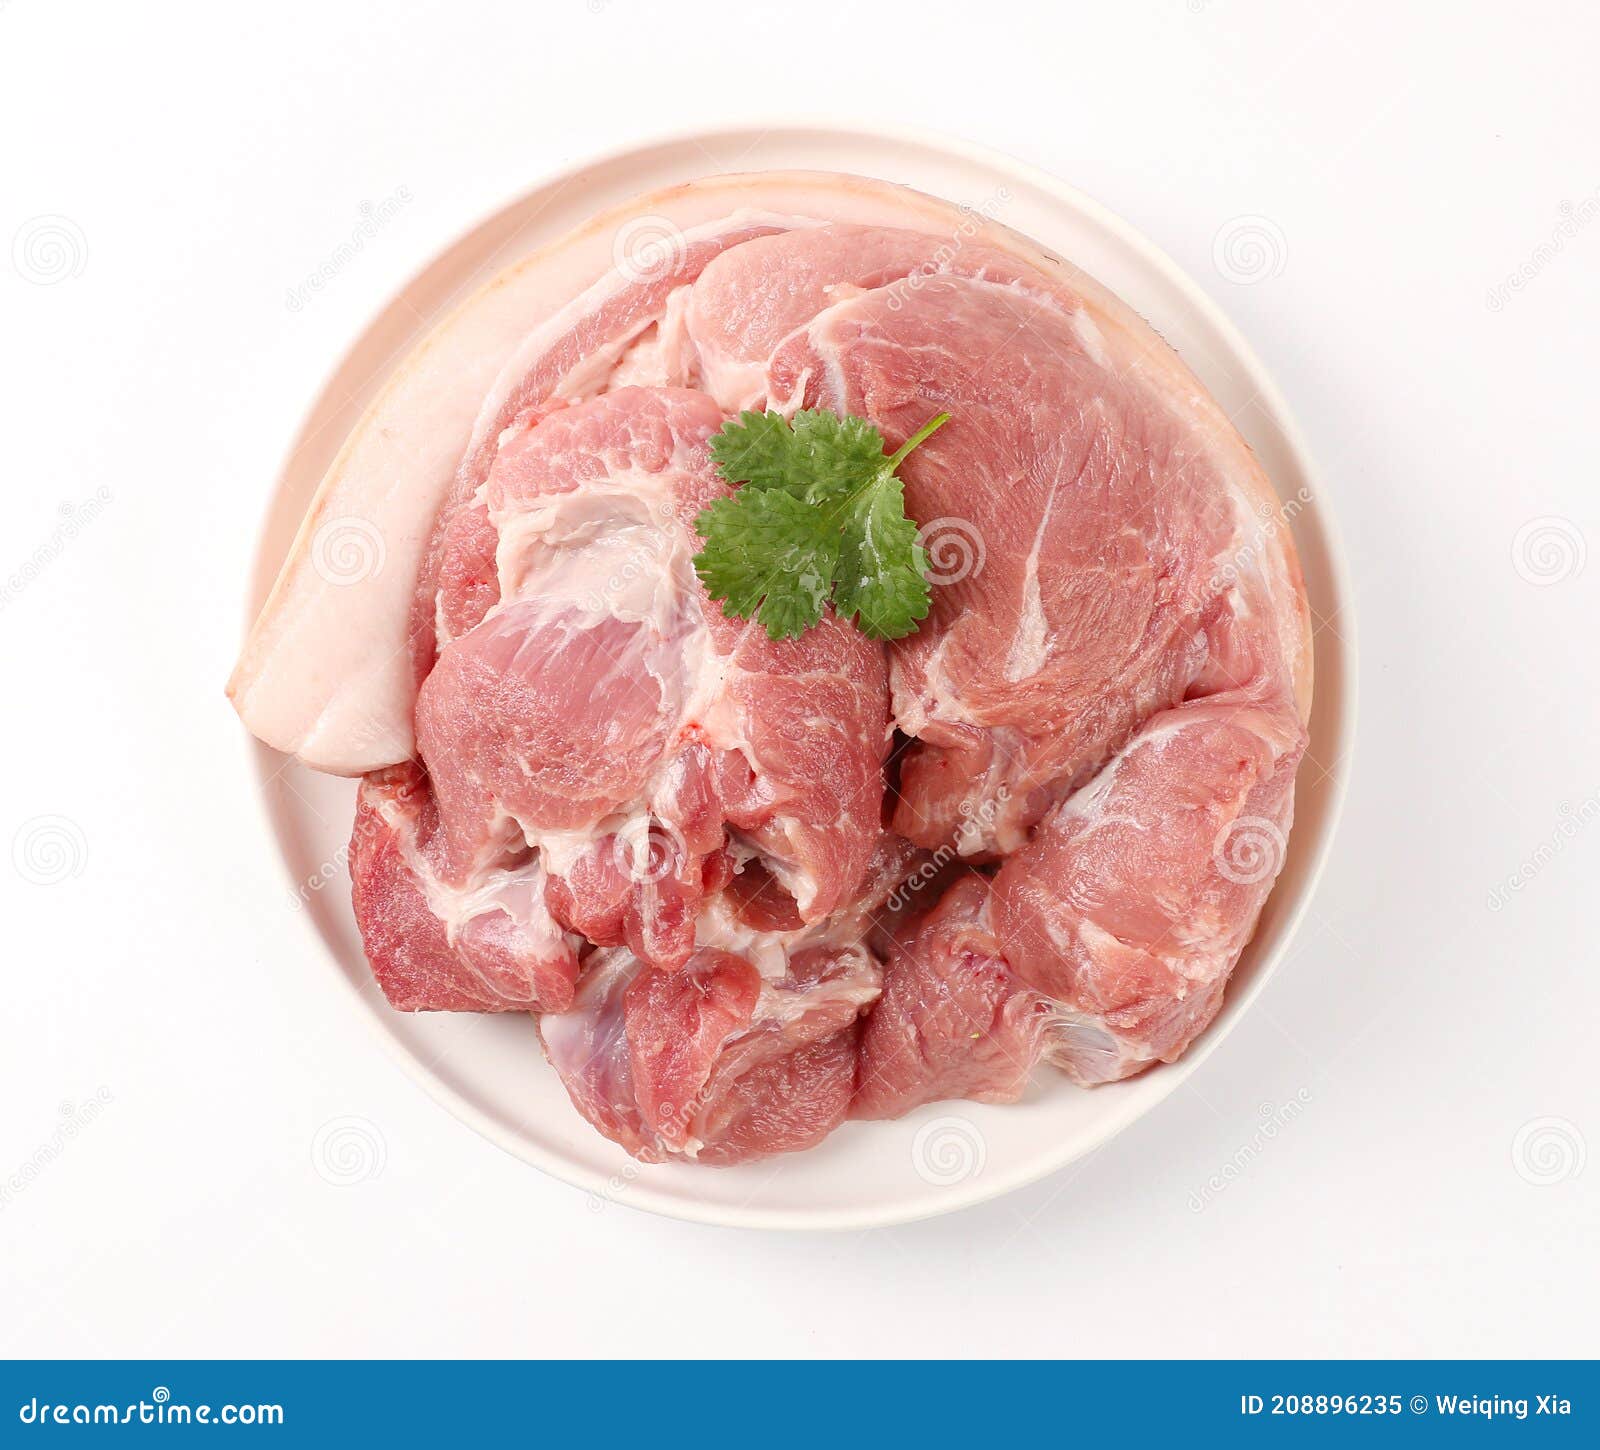 slices of pork with rosemary  on white background